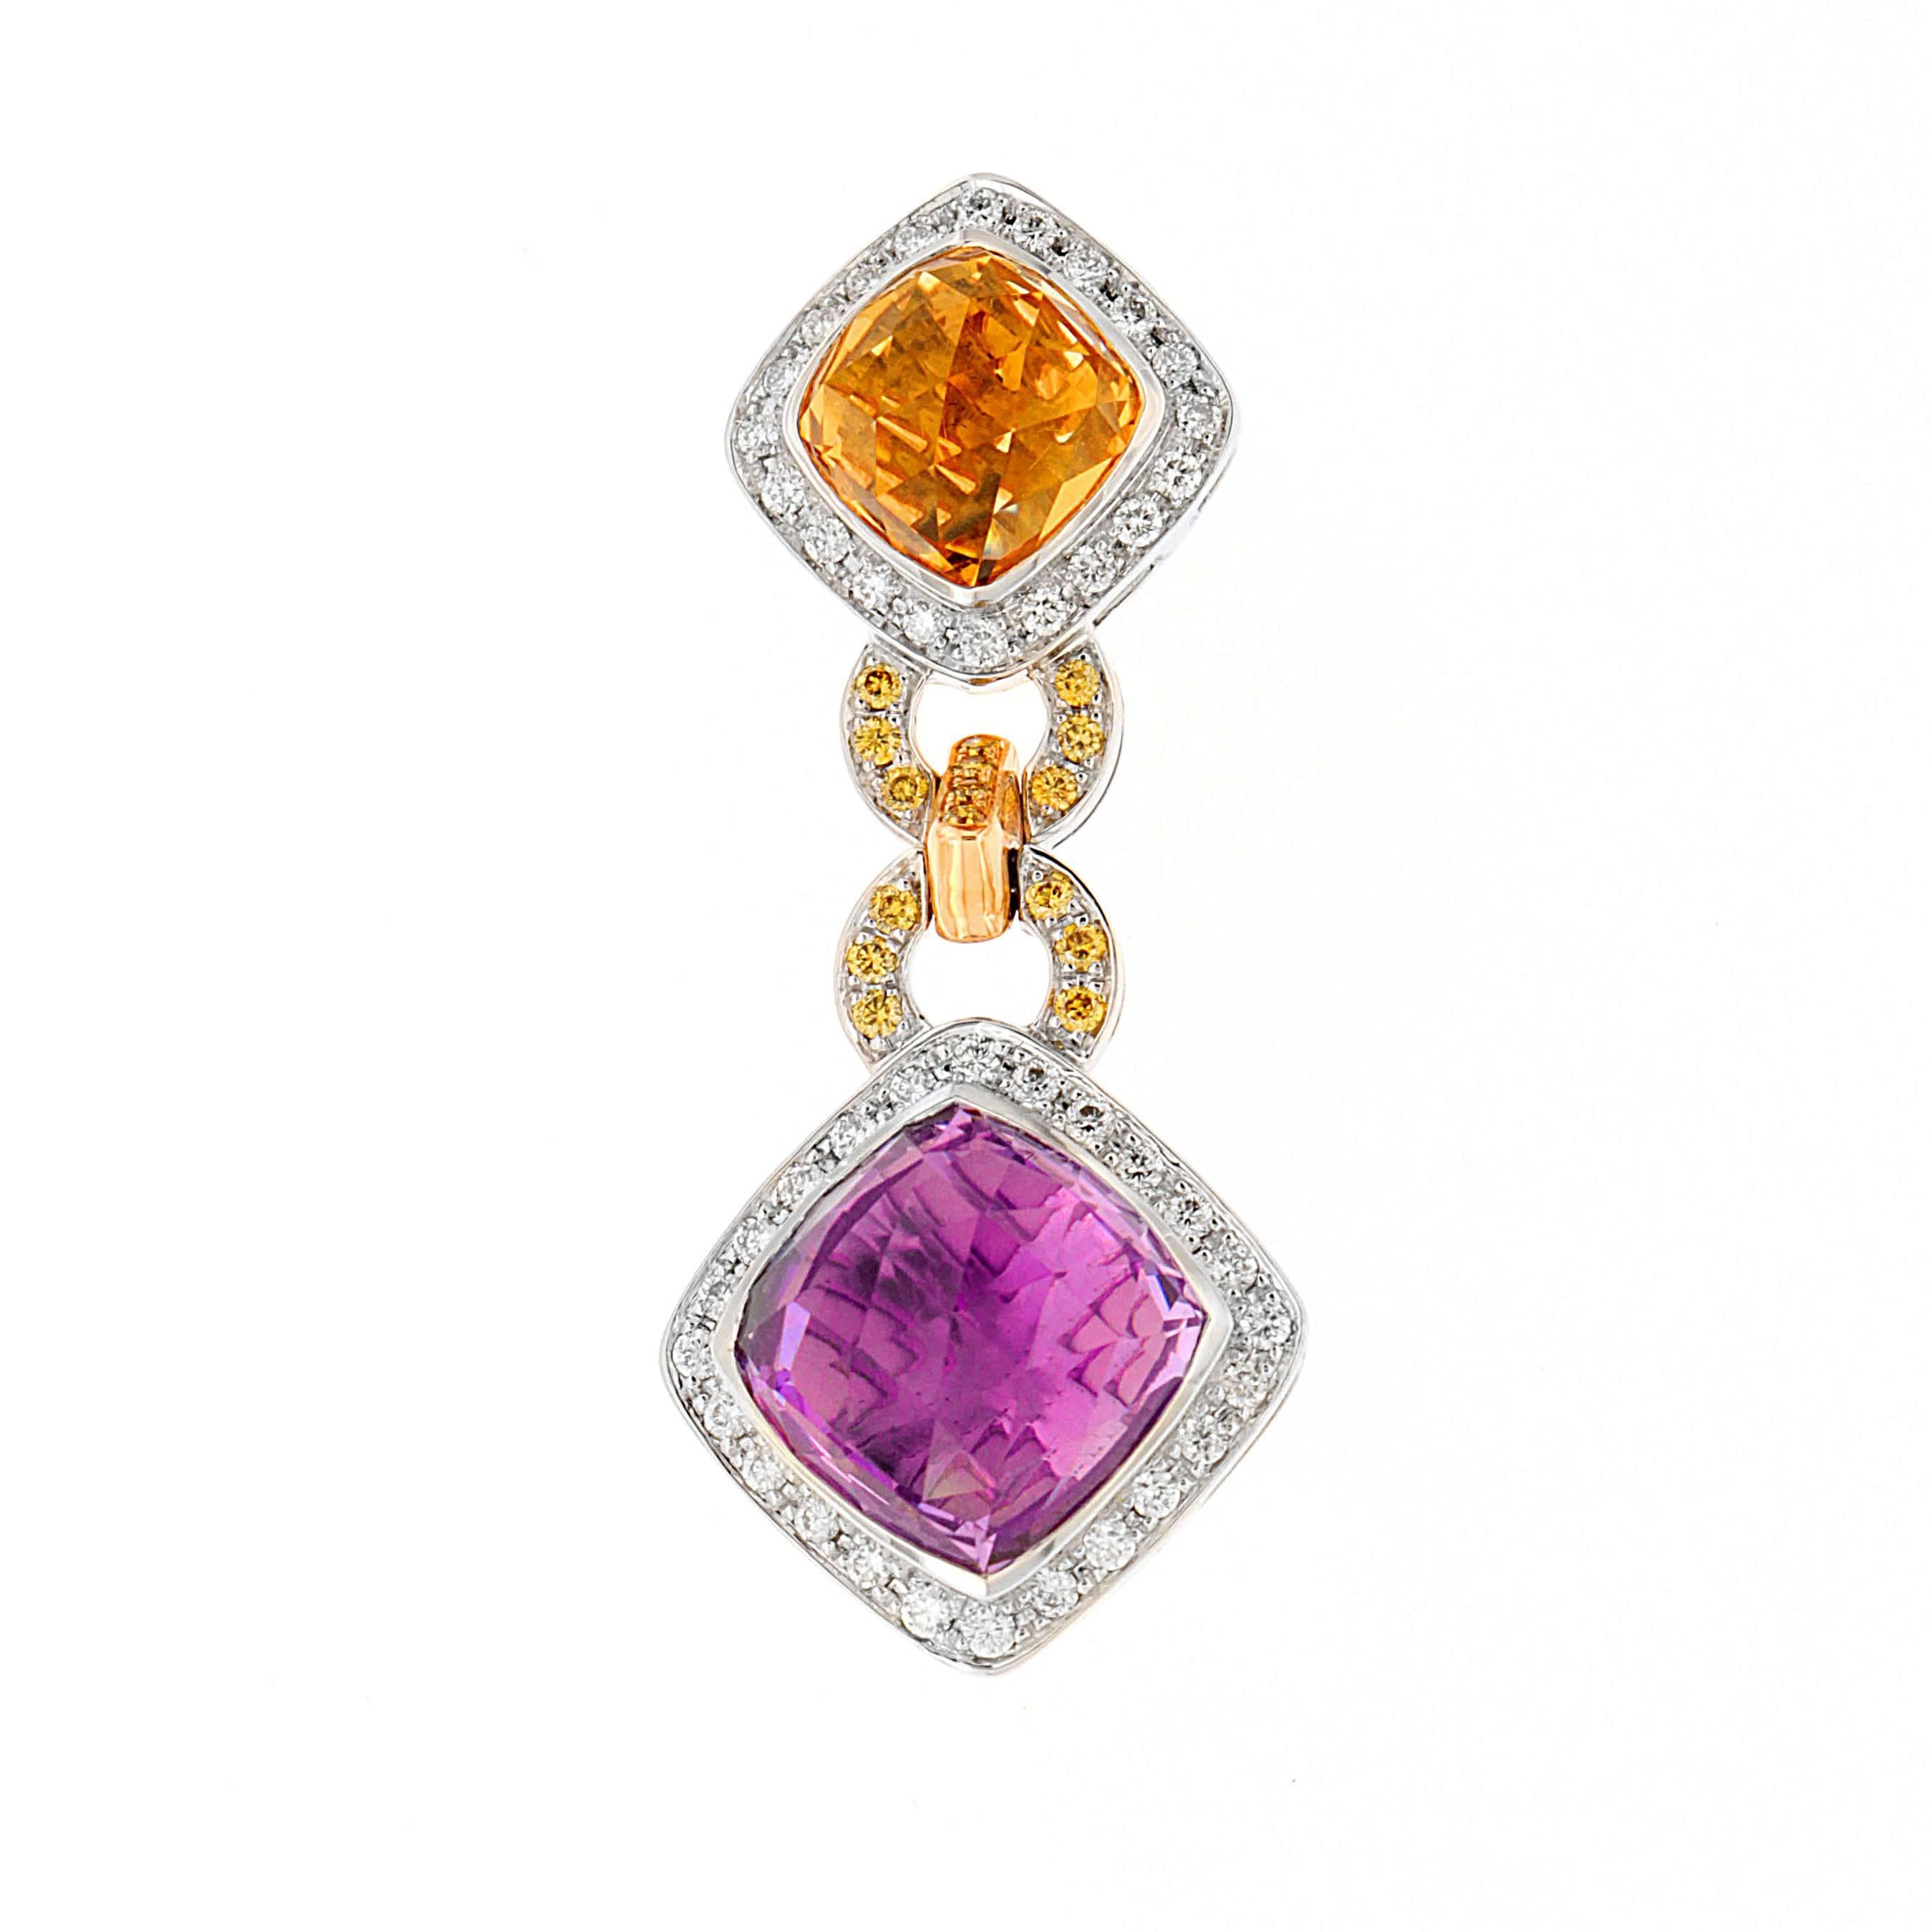 Rarely do spicy orange hues meet the regal prowess of purple in a precious drop earring. When they do, old Hollywood mark of enduring glamour lives on. Welcome to the Indelible earrings, a Zorab Creation. 

Channeling Ava Gardner, Marilyn Monroe and